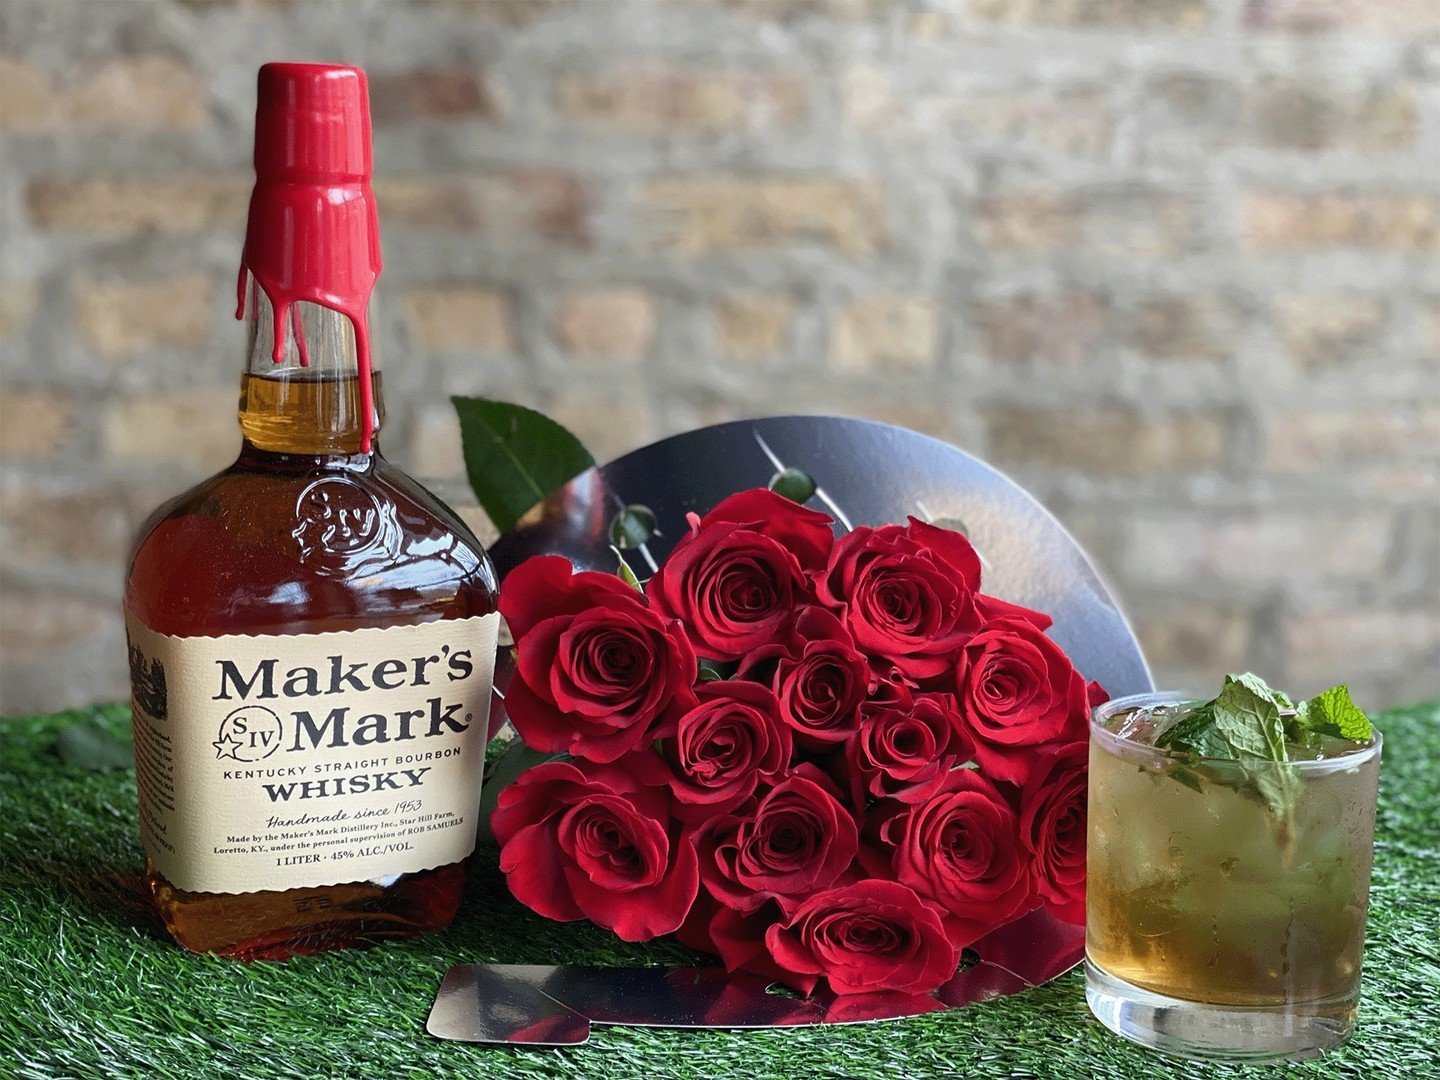 Nothing says Derby Day like a Mint Julep! Even better: we are featuring specials for Cinco de Mayo and the Run for the Roses May 3-5. We'll be offering $16 Steak Fajitas with Mexican Rice / Refried Beans, $4 Modelo and Corona bottles, $6 Termana Blan